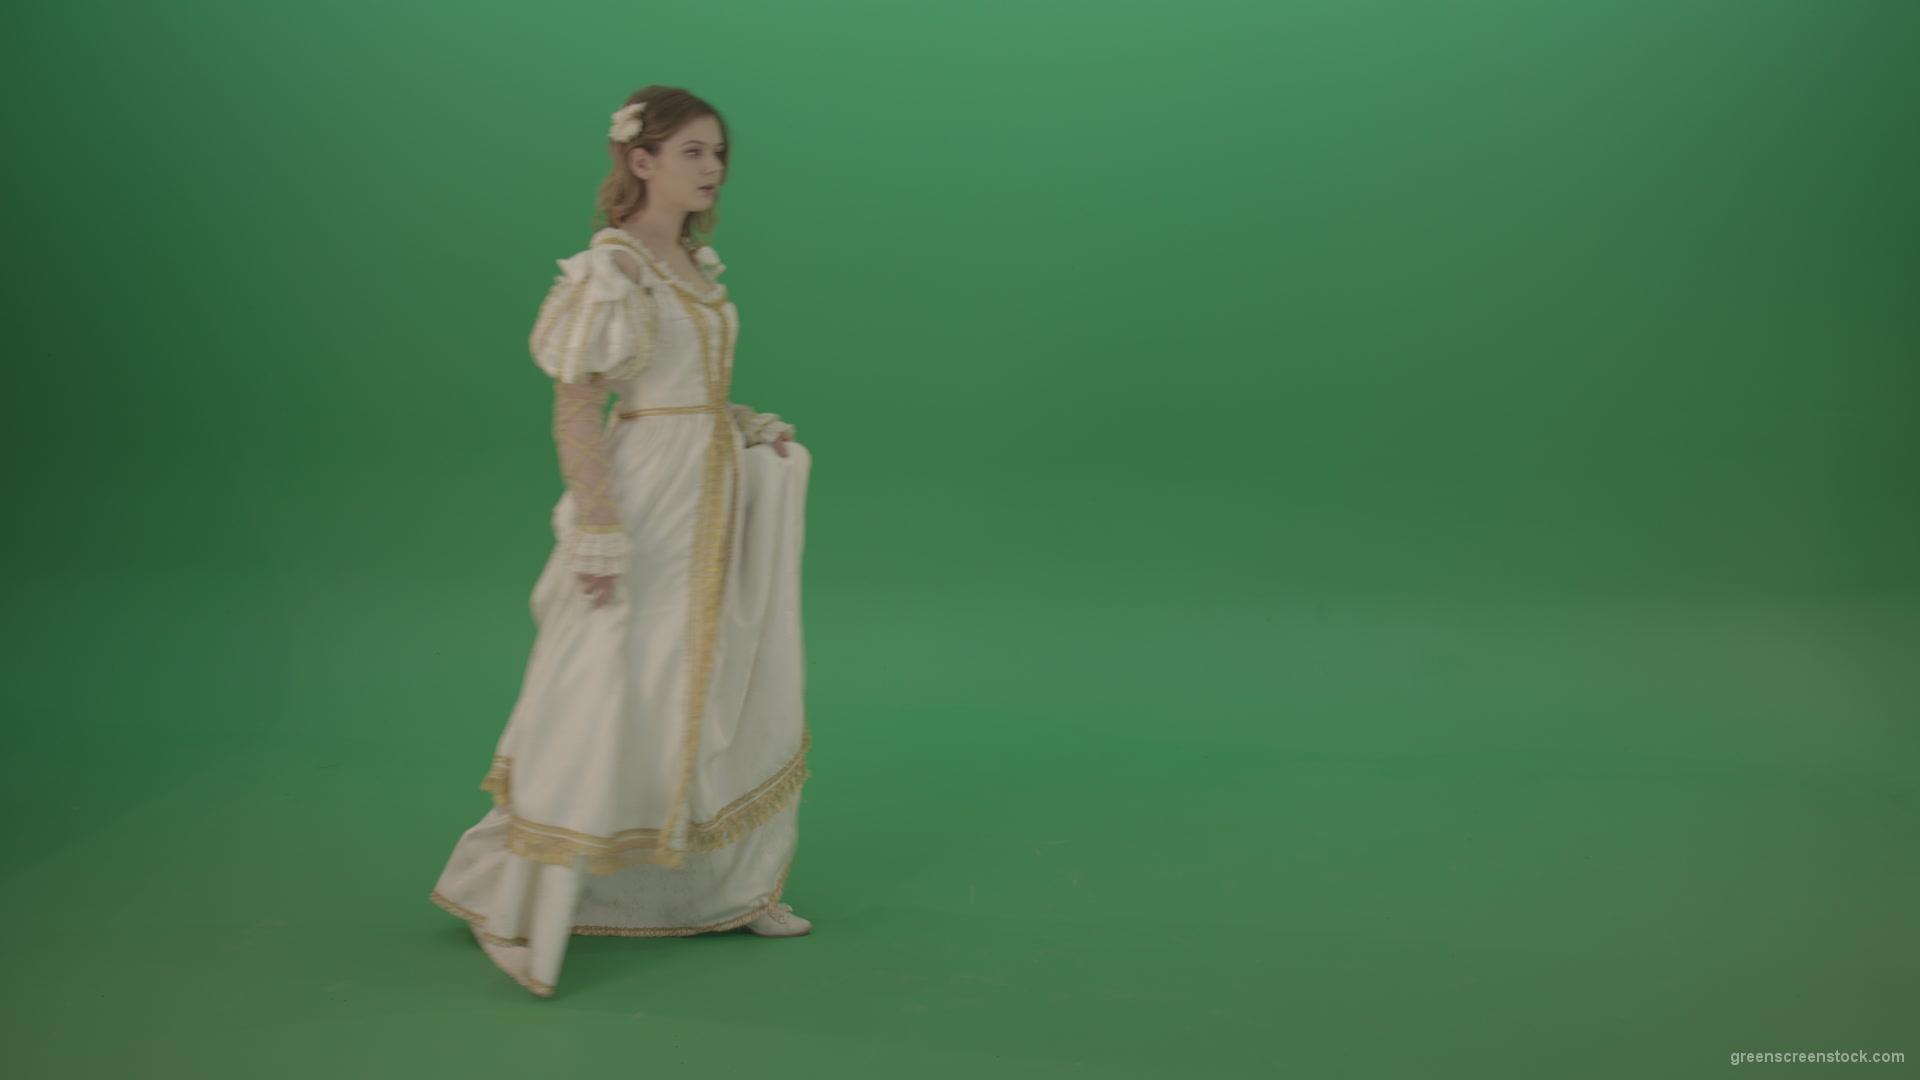 Mysterious-princess-makes-a-white-dress-goes-aside-isolated-on-green-background_004 Green Screen Stock